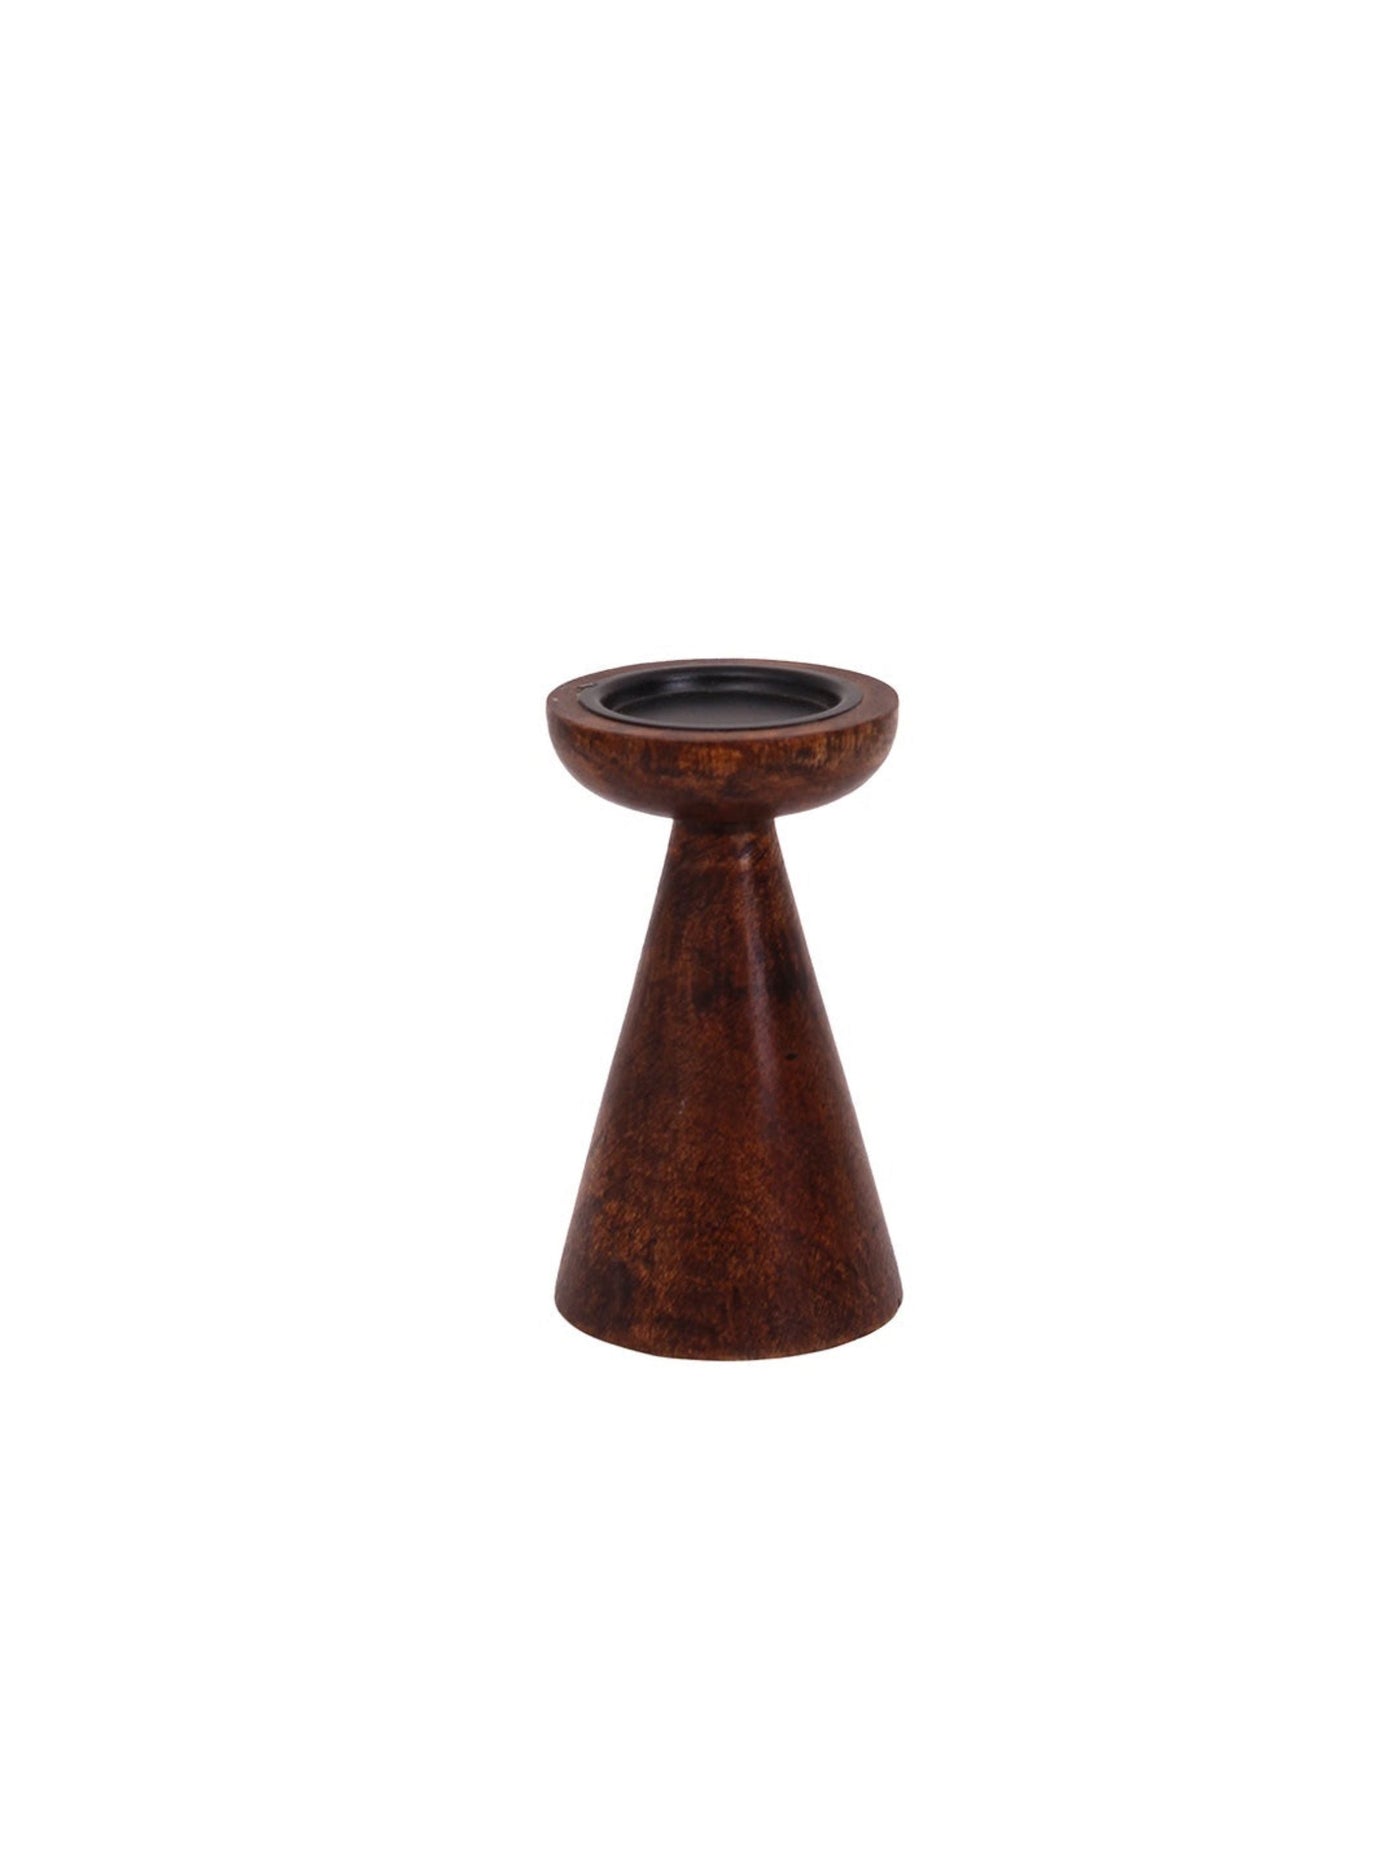 Saddle Candle Stand Gift Box - Coffee Brown